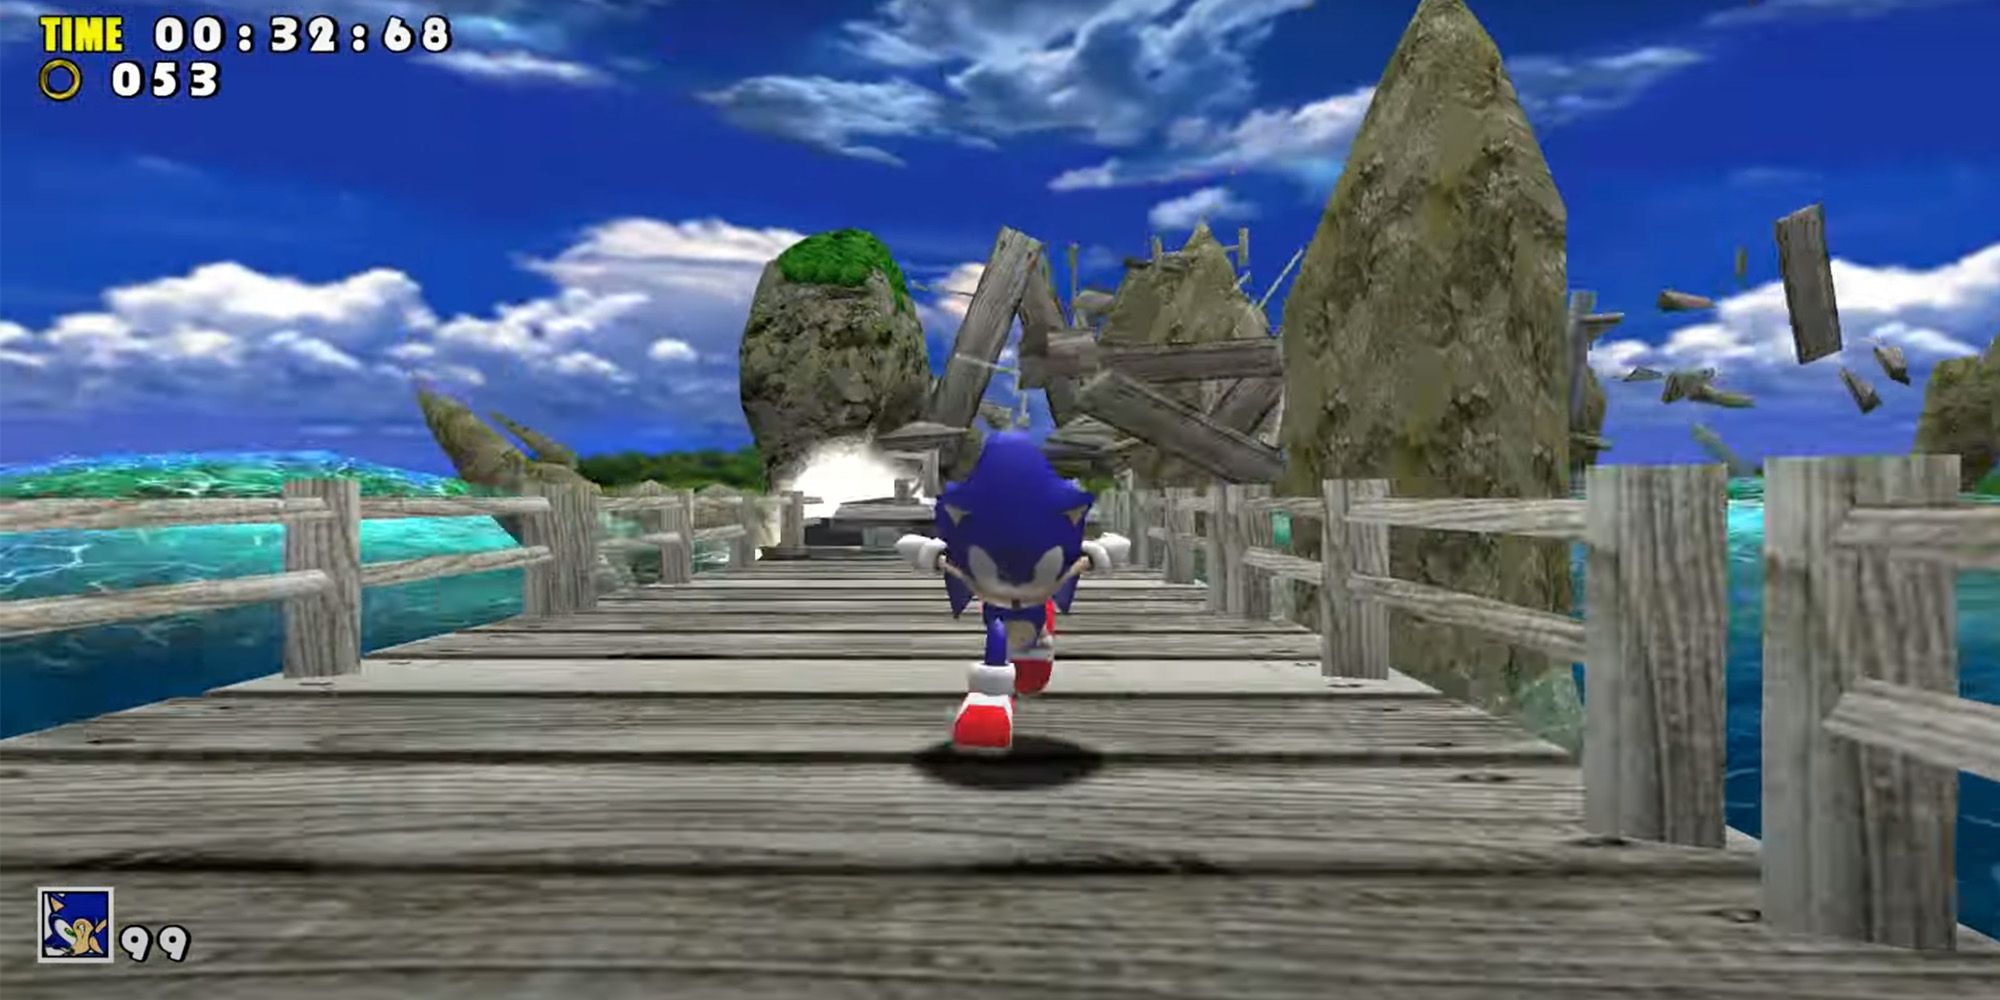 Sonic Adventure (Dreamcast) - Sonic running away from a whale in Emerald Coast